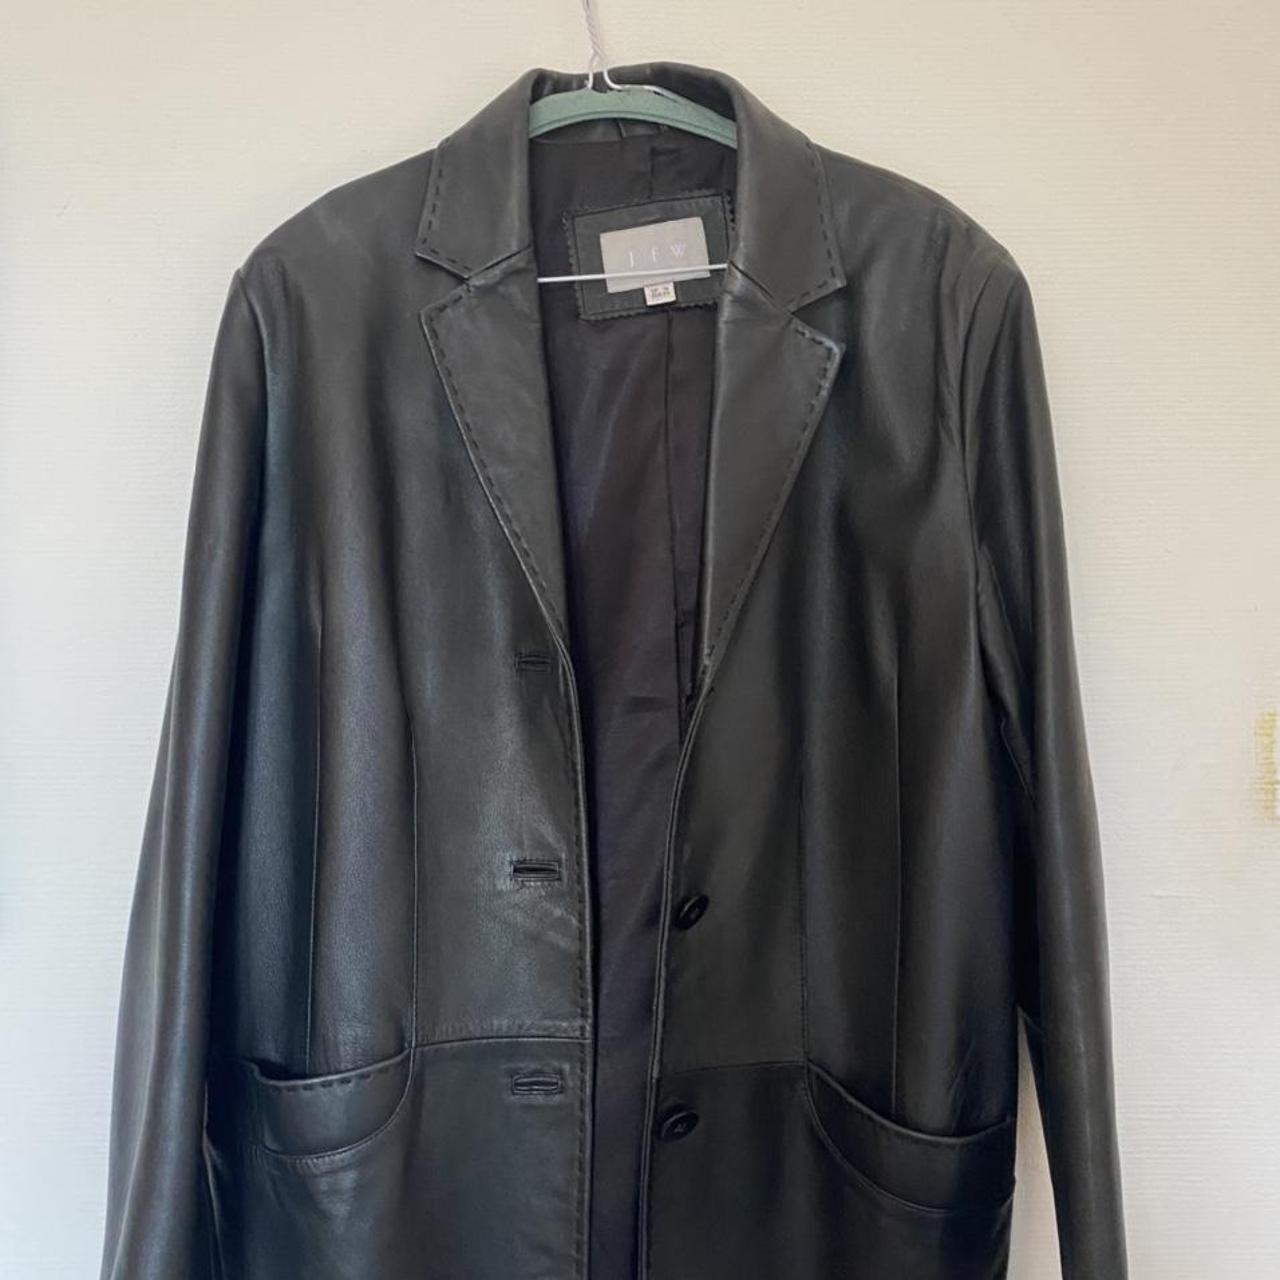 Real Leather Jacket Insane condition Size 16 but... - Depop